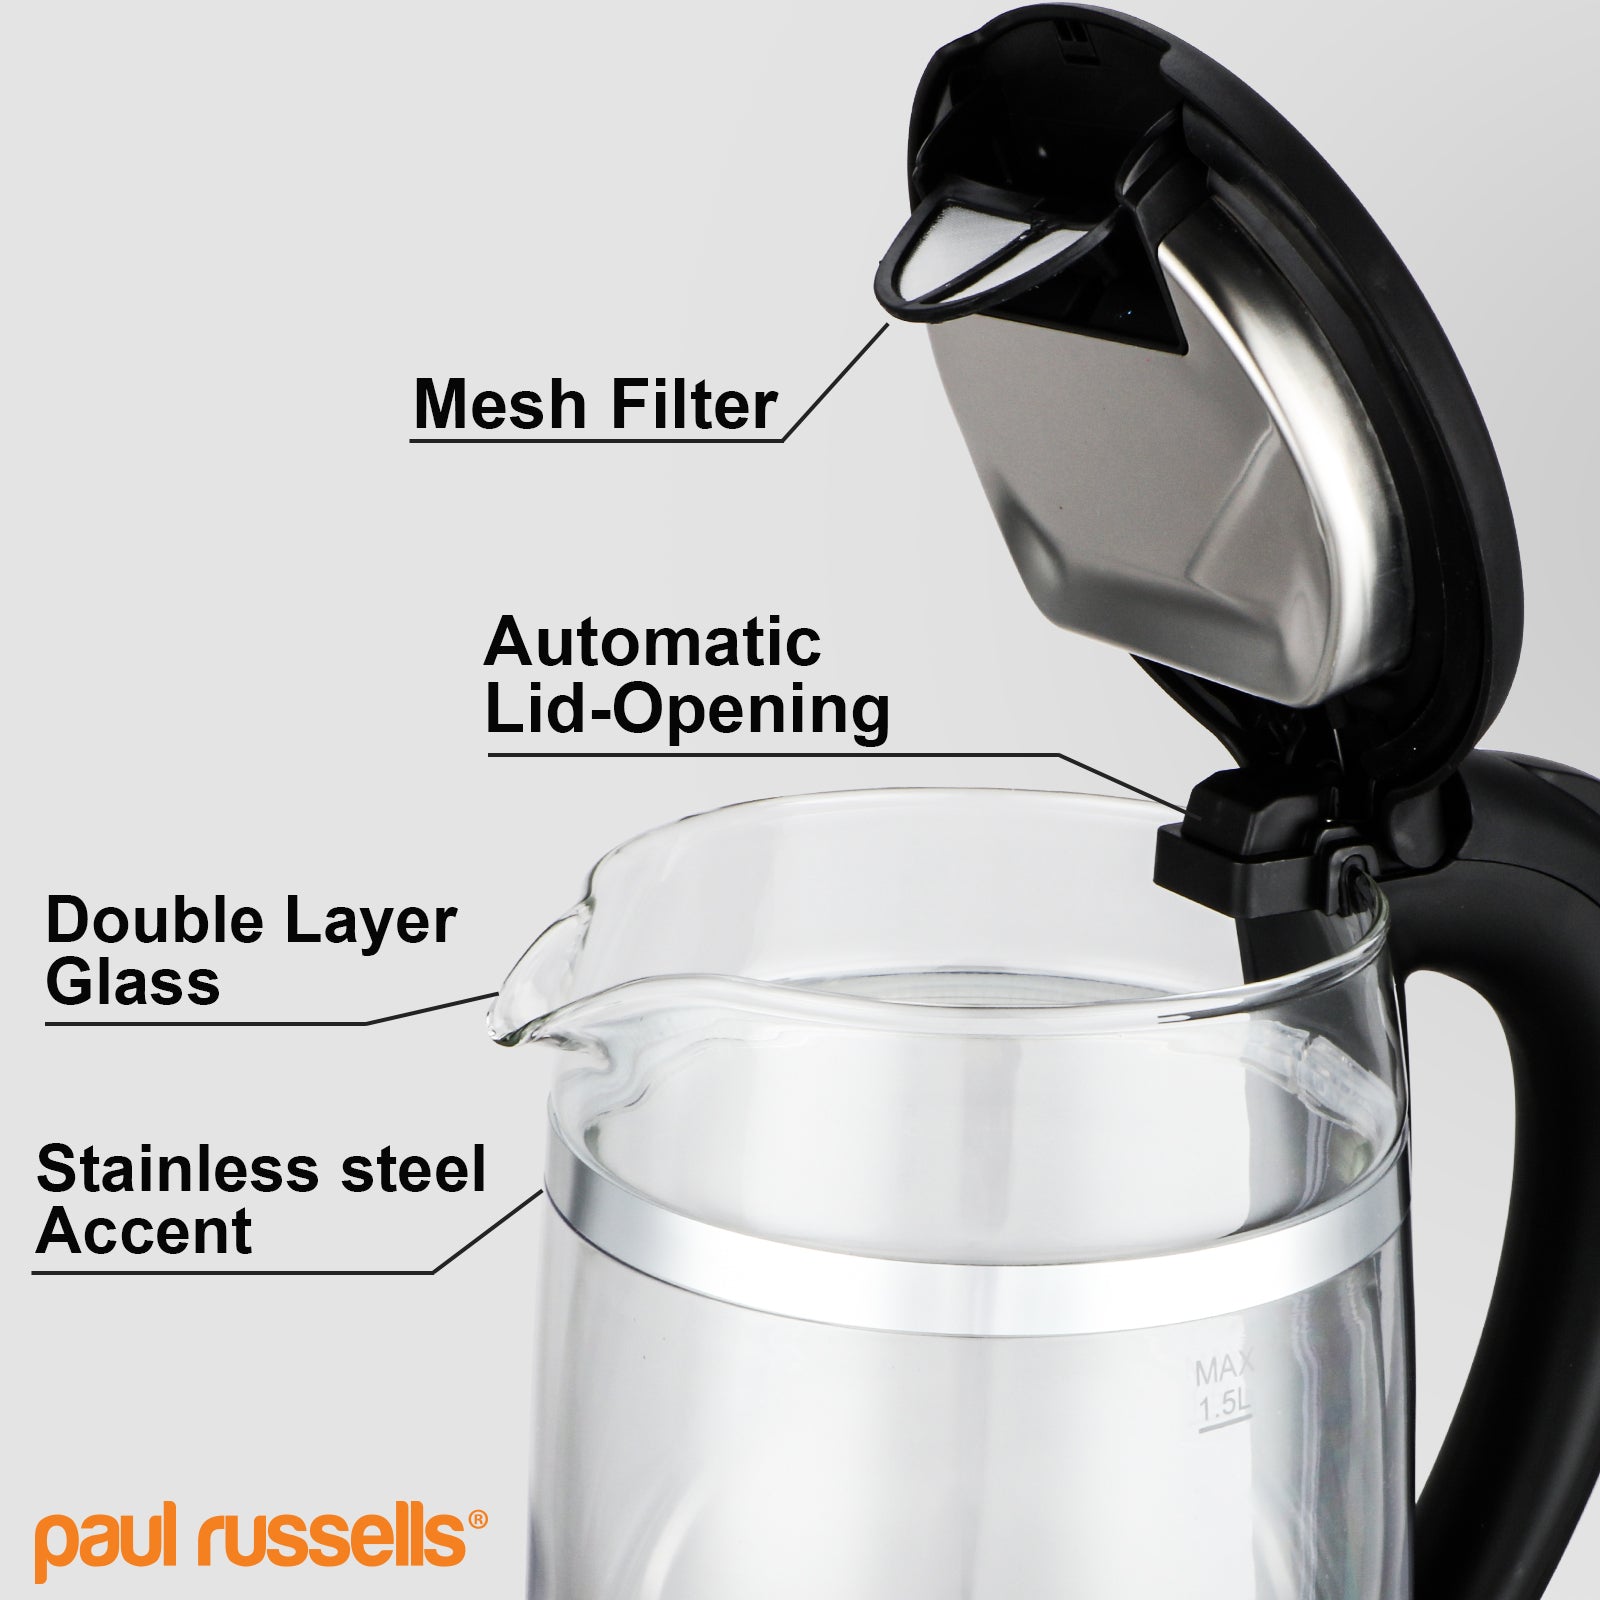 Paul Russells Electric Kettle, Quiet fast Boil, Double Layer Glass,3000W 1.5L with Blue LED, Boil-Dry Protection, Stainless Steel plate, Fast Boil Hot water dispenser, Instant Kettle, Black